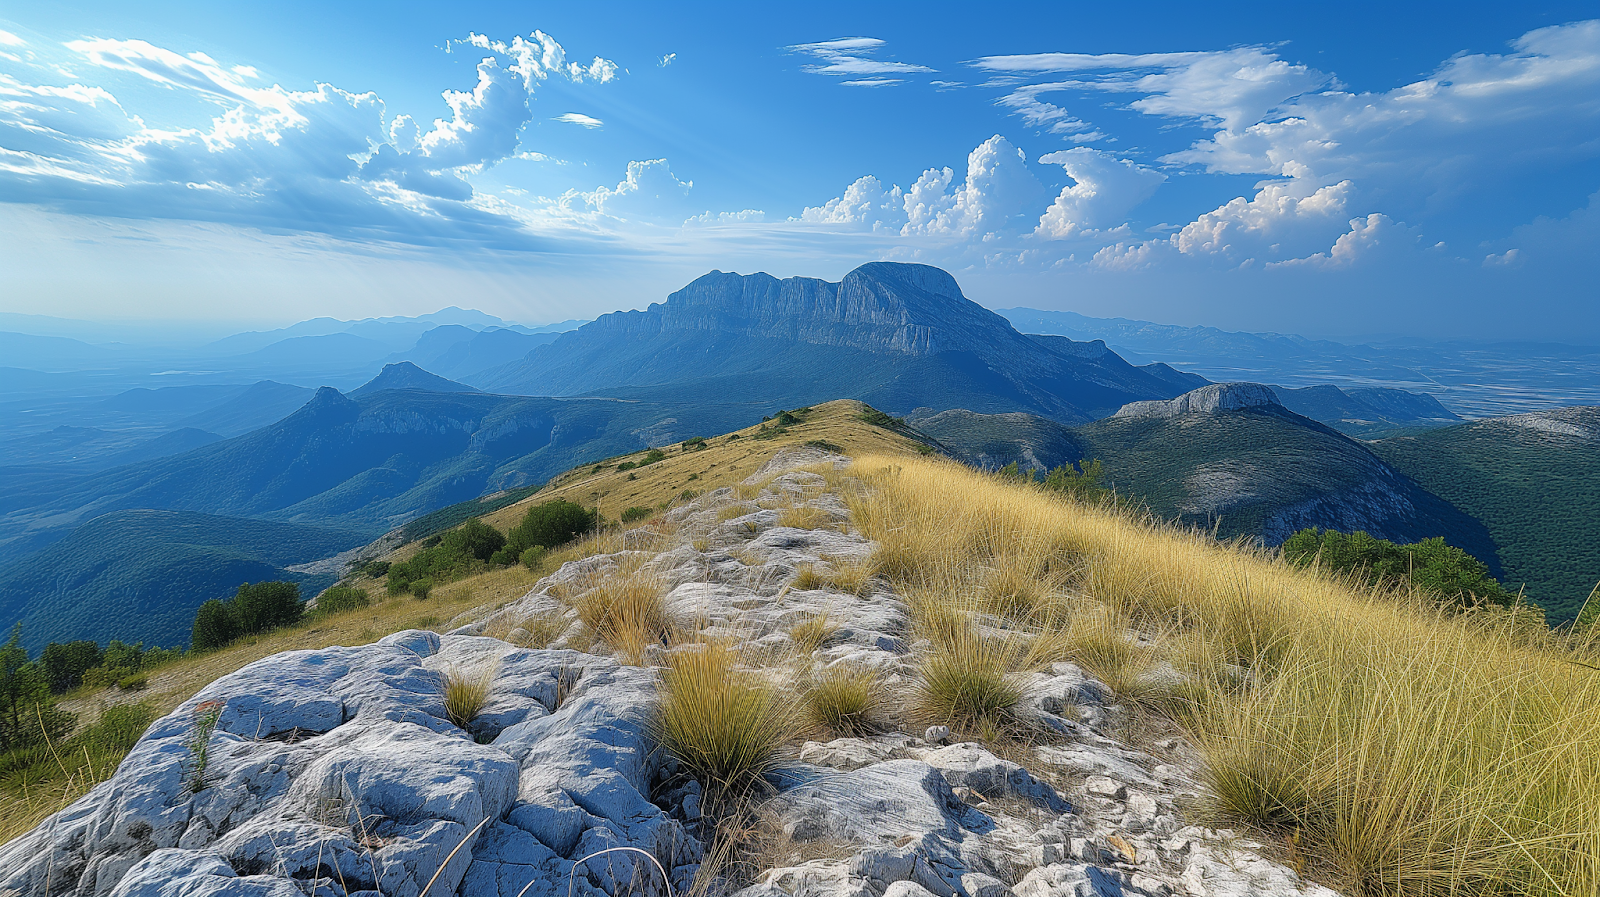 View overlooking Monte Titano, the highest point in the country of San Marino